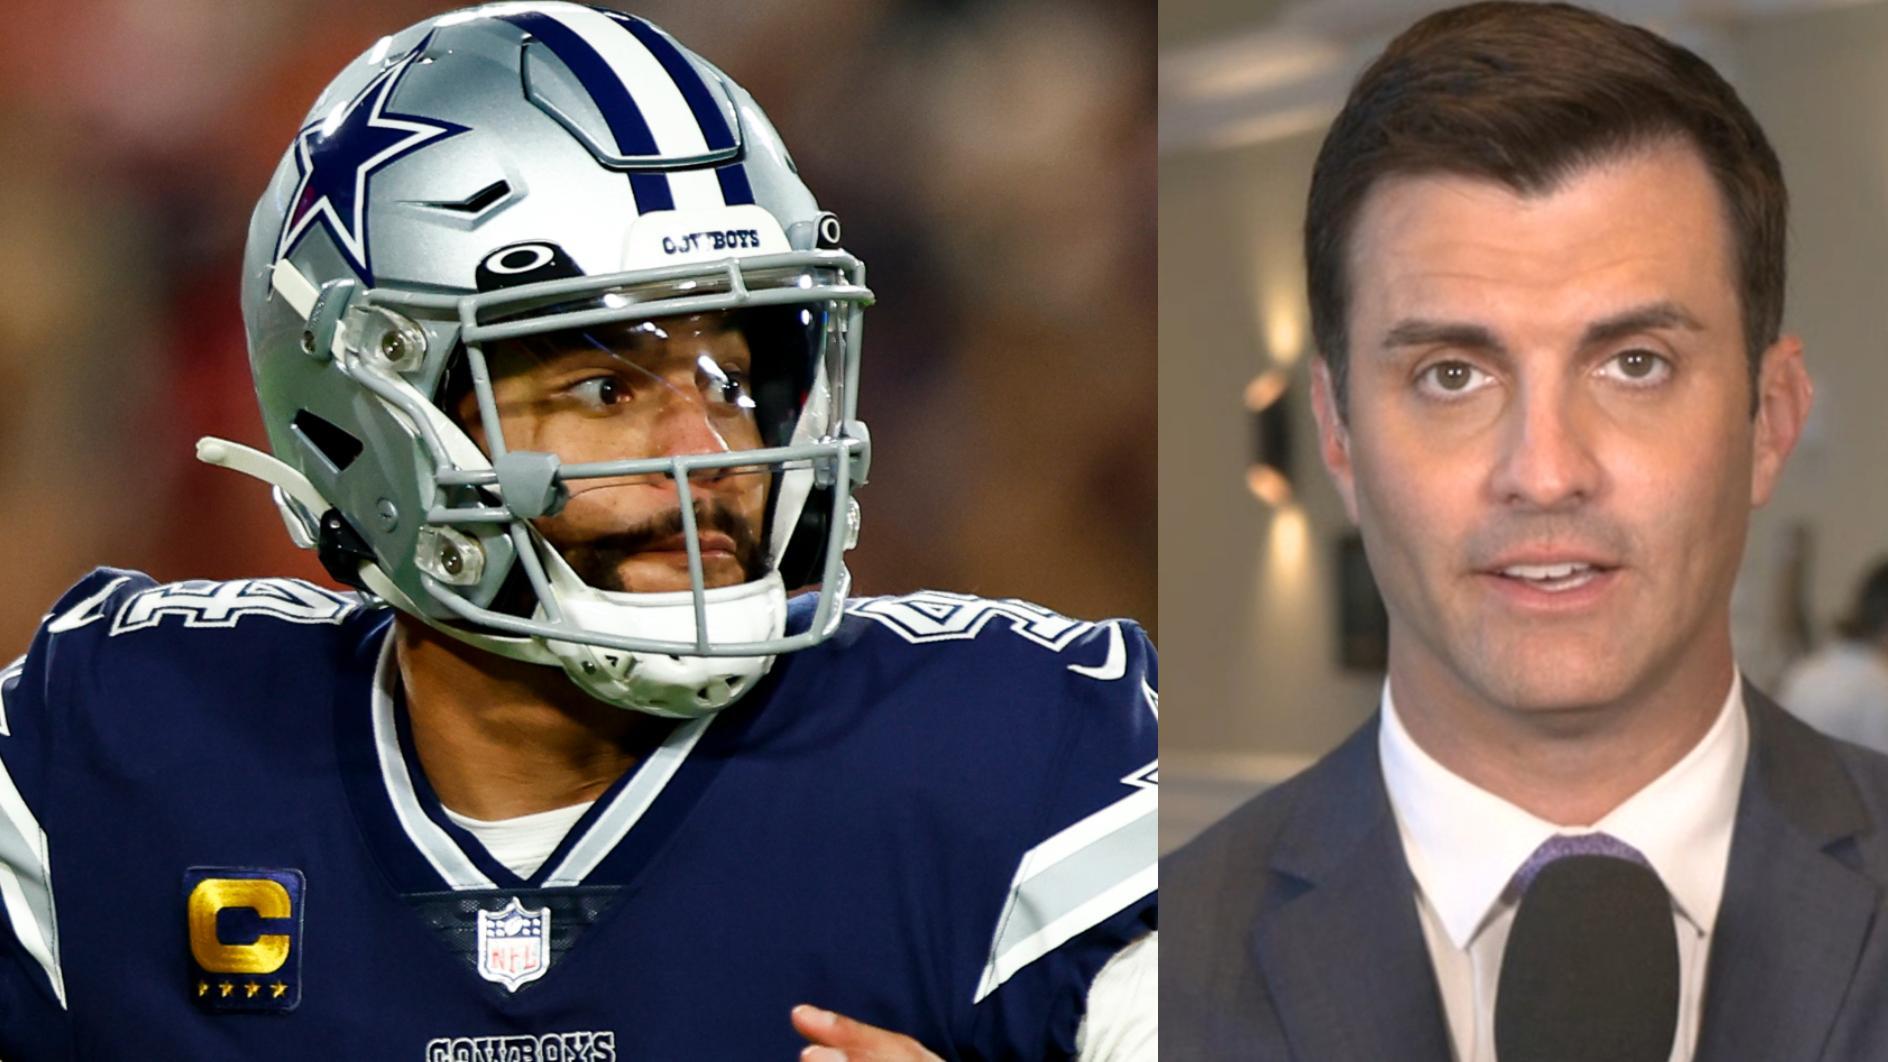 Have the Cowboys mishandled Dak's contract extension?